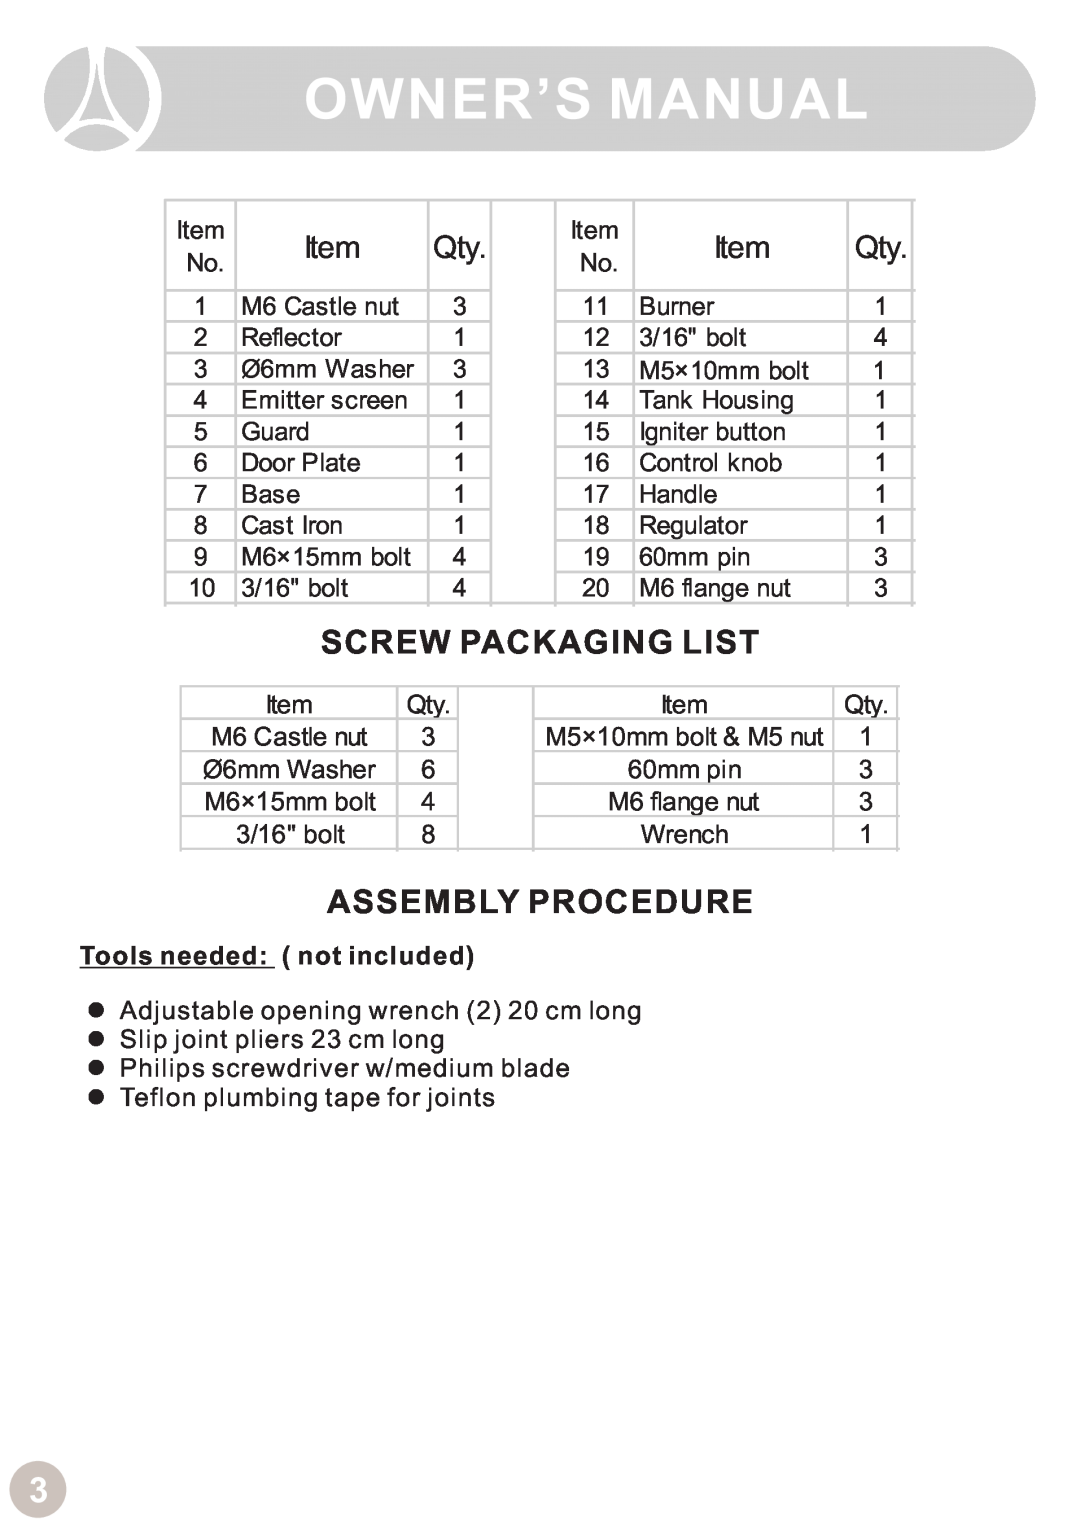 Ocean Electronic Tabletop Heater manual Screw Packaging List, Assembly Procedure, Tools needed not included 